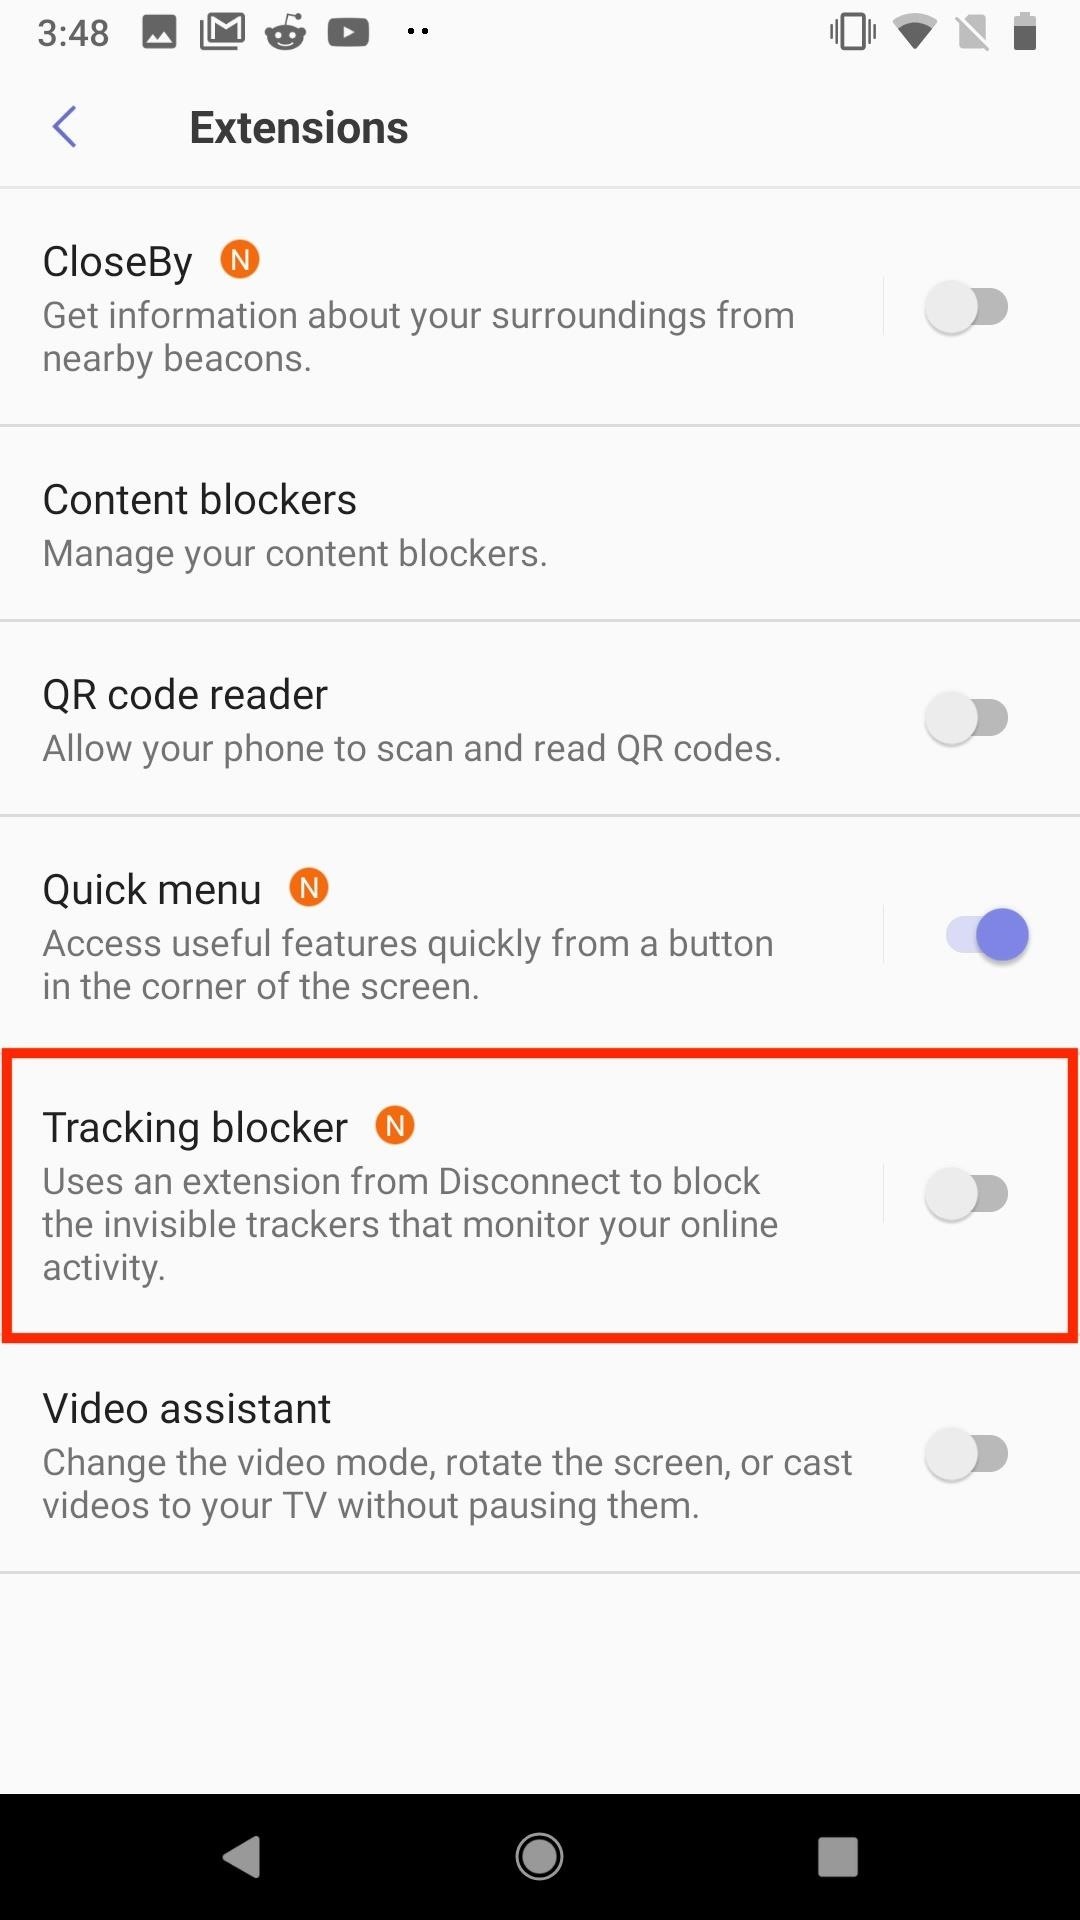 Samsung Internet 101: How to Use Extensions to Block Ads, Scan QR Codes, & More